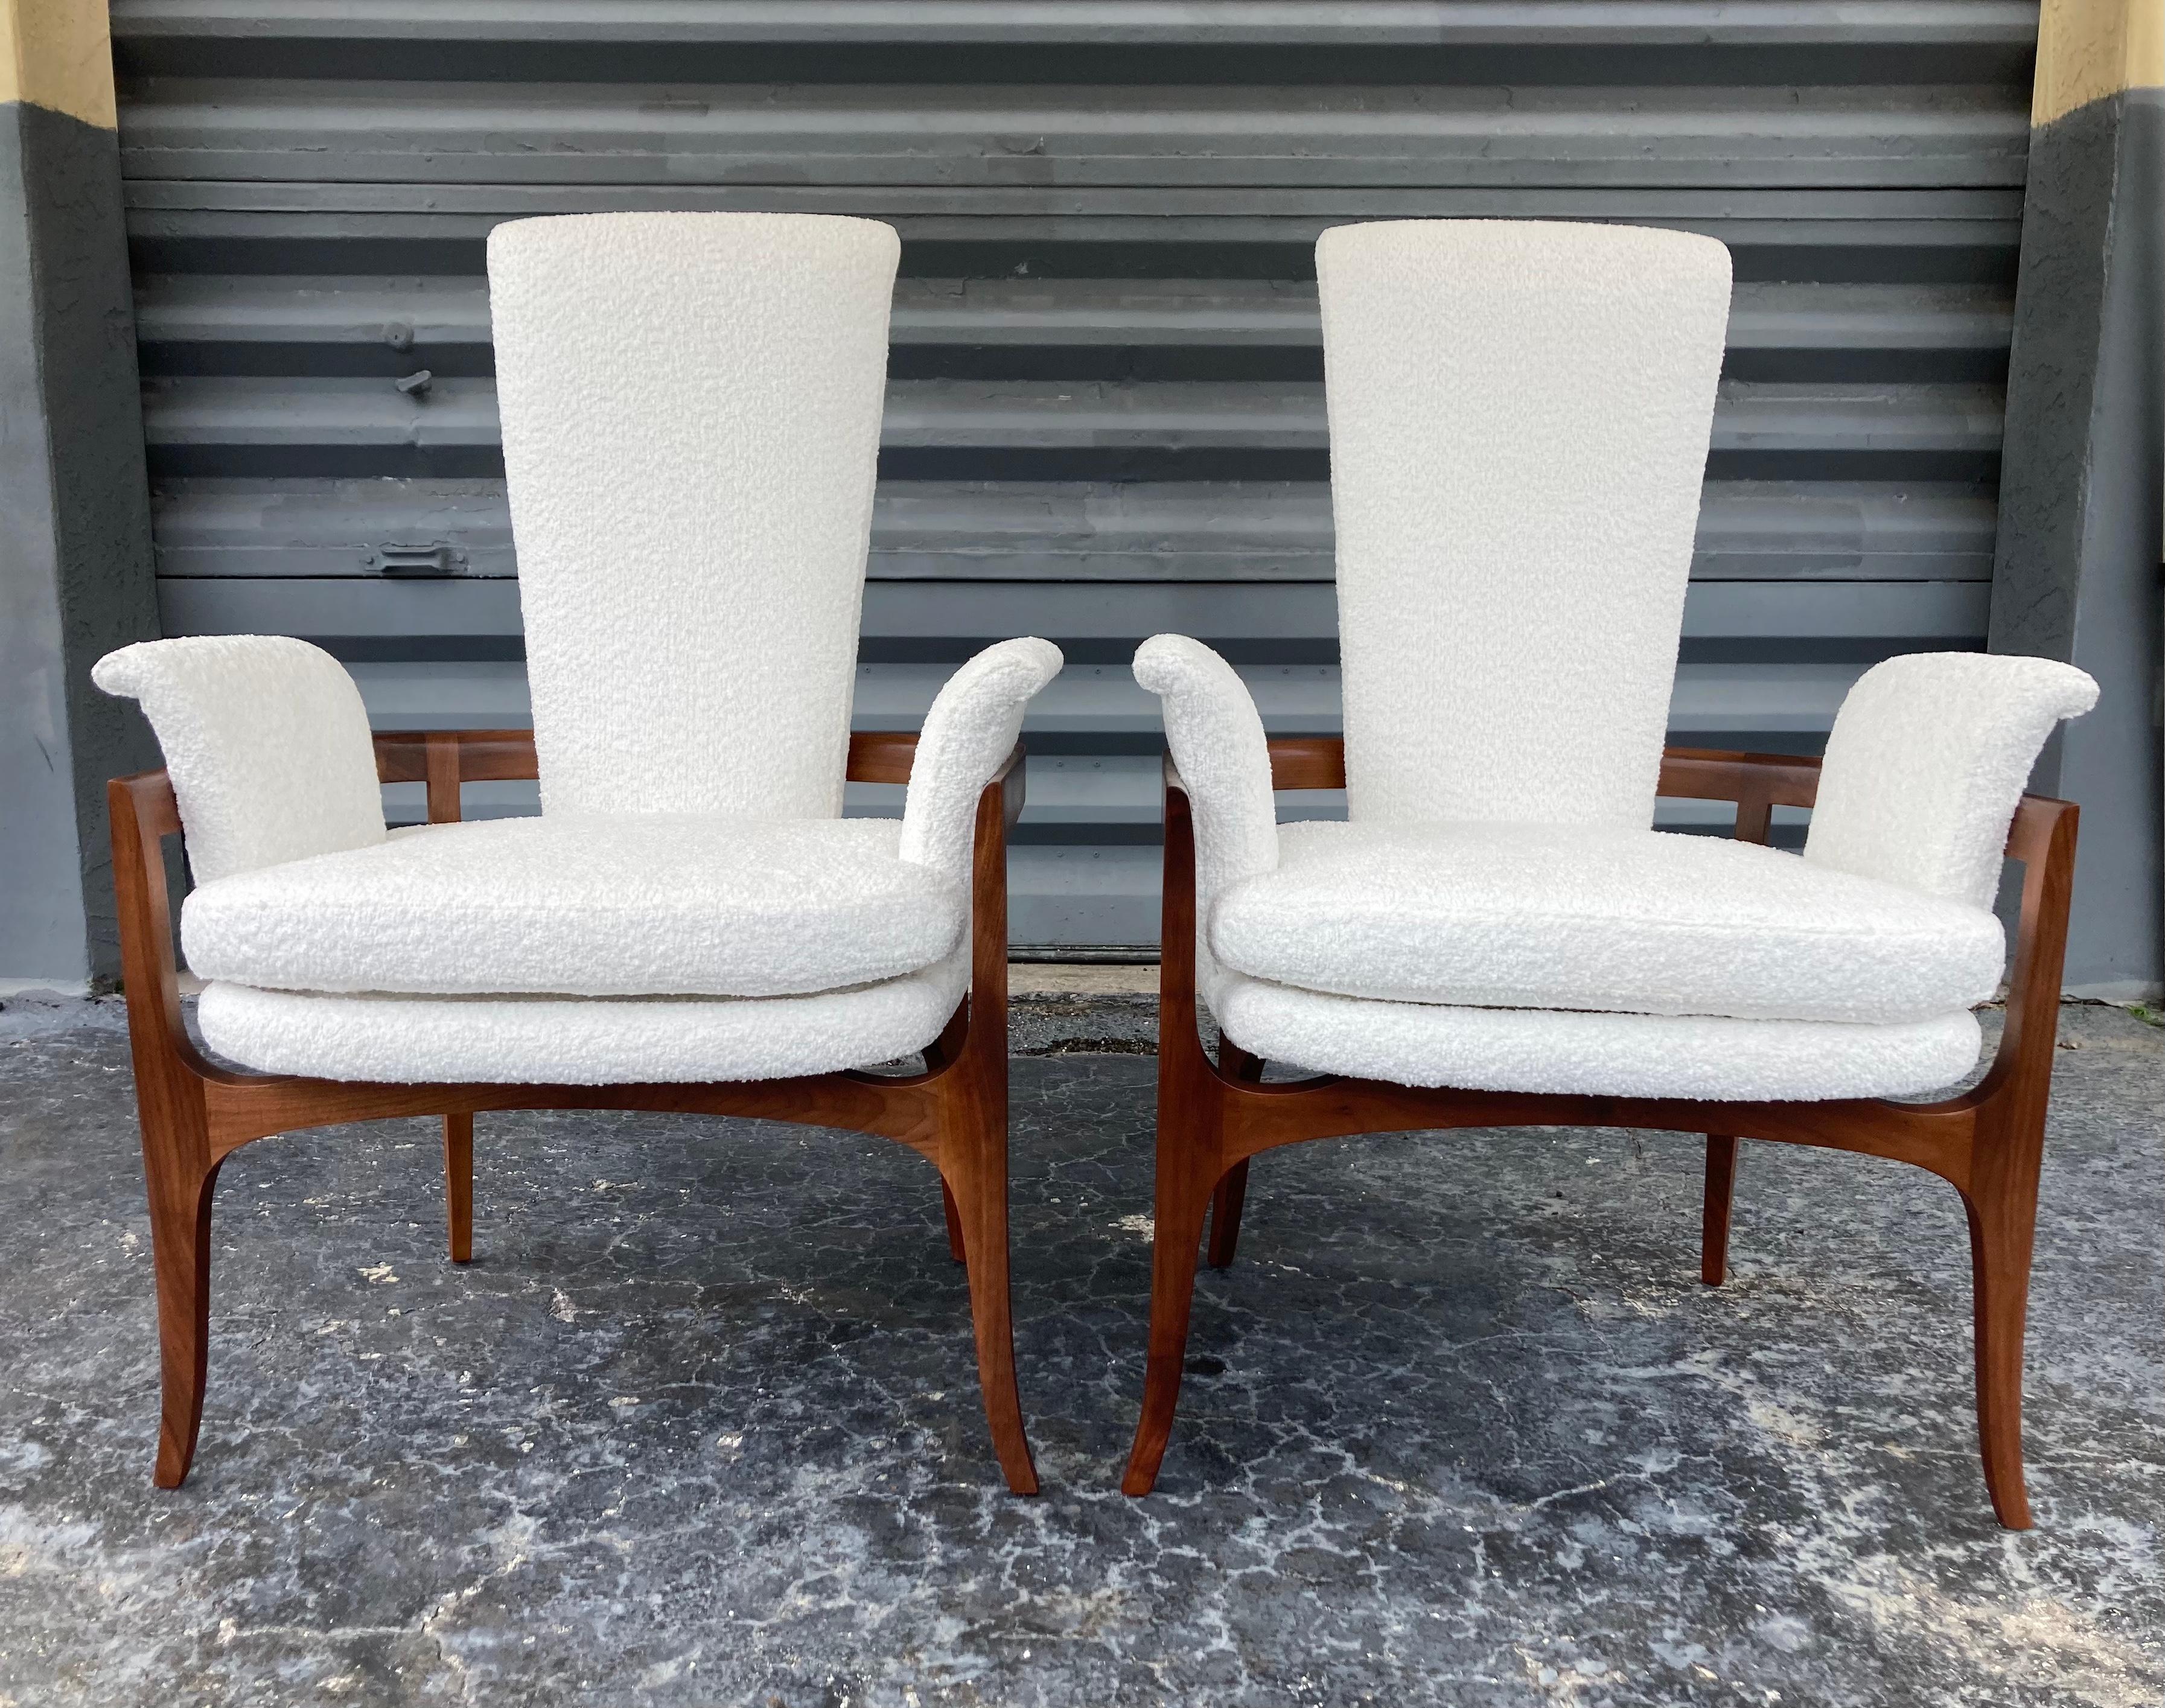 Sculptural Mid-Century Modern Lounge Chairs, Walnut and White Boucle Fabric For Sale 3